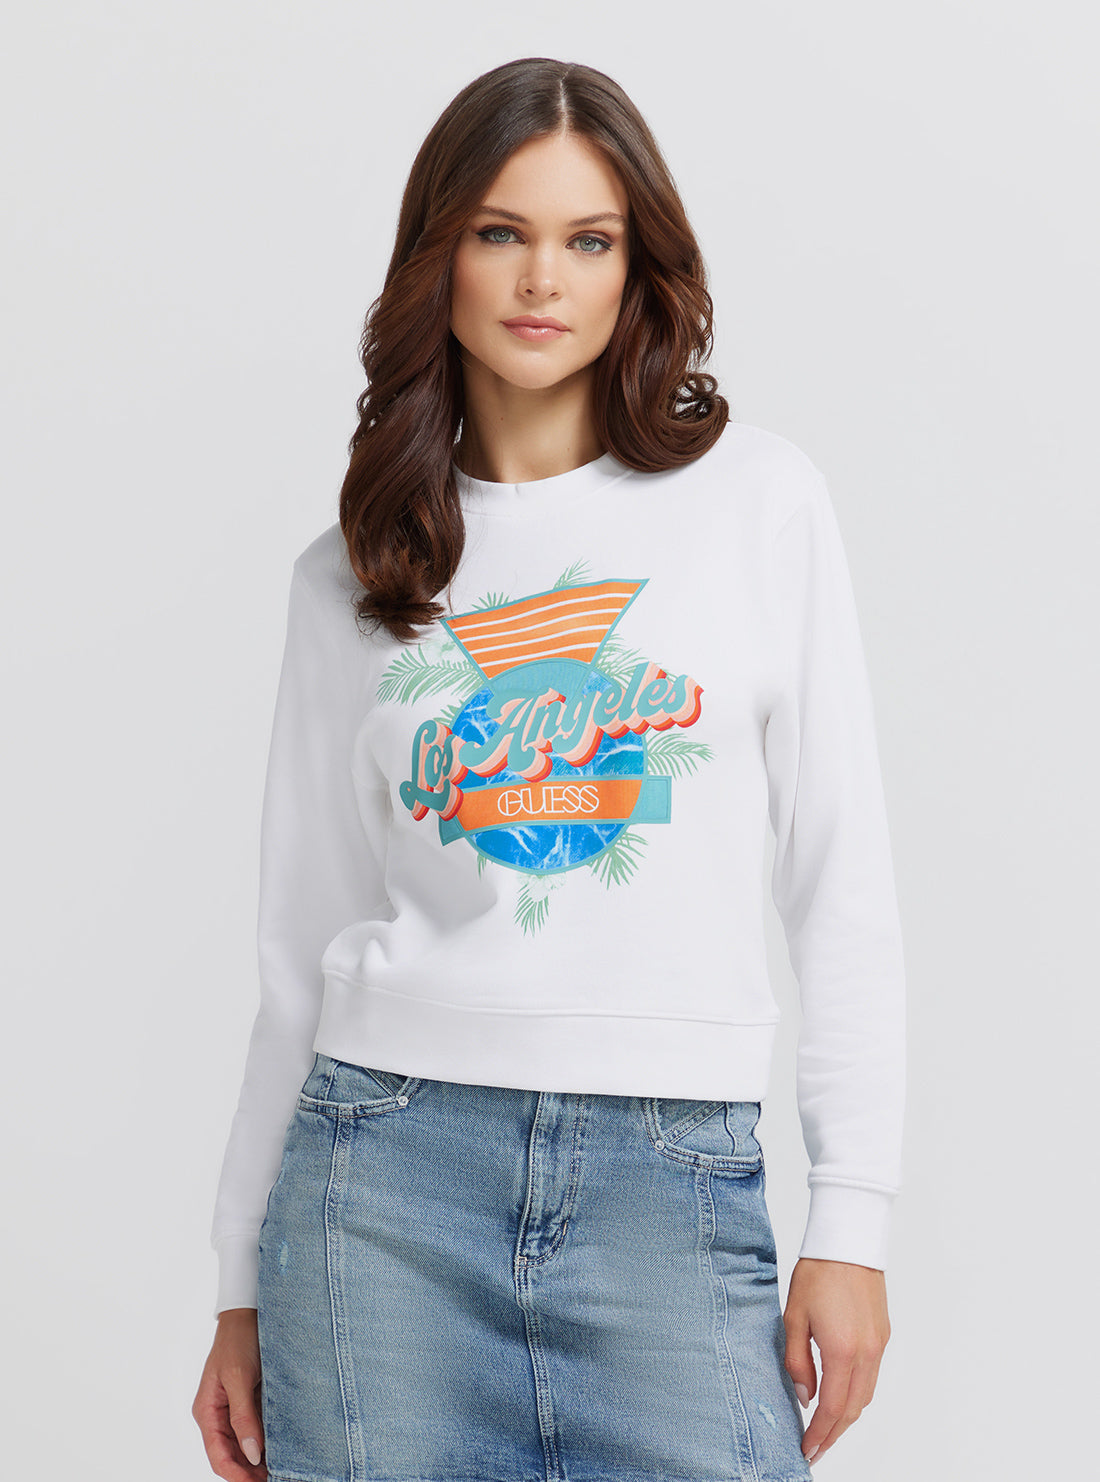 White Los Angeles Logo Jumper | GUESS Women's | Front view